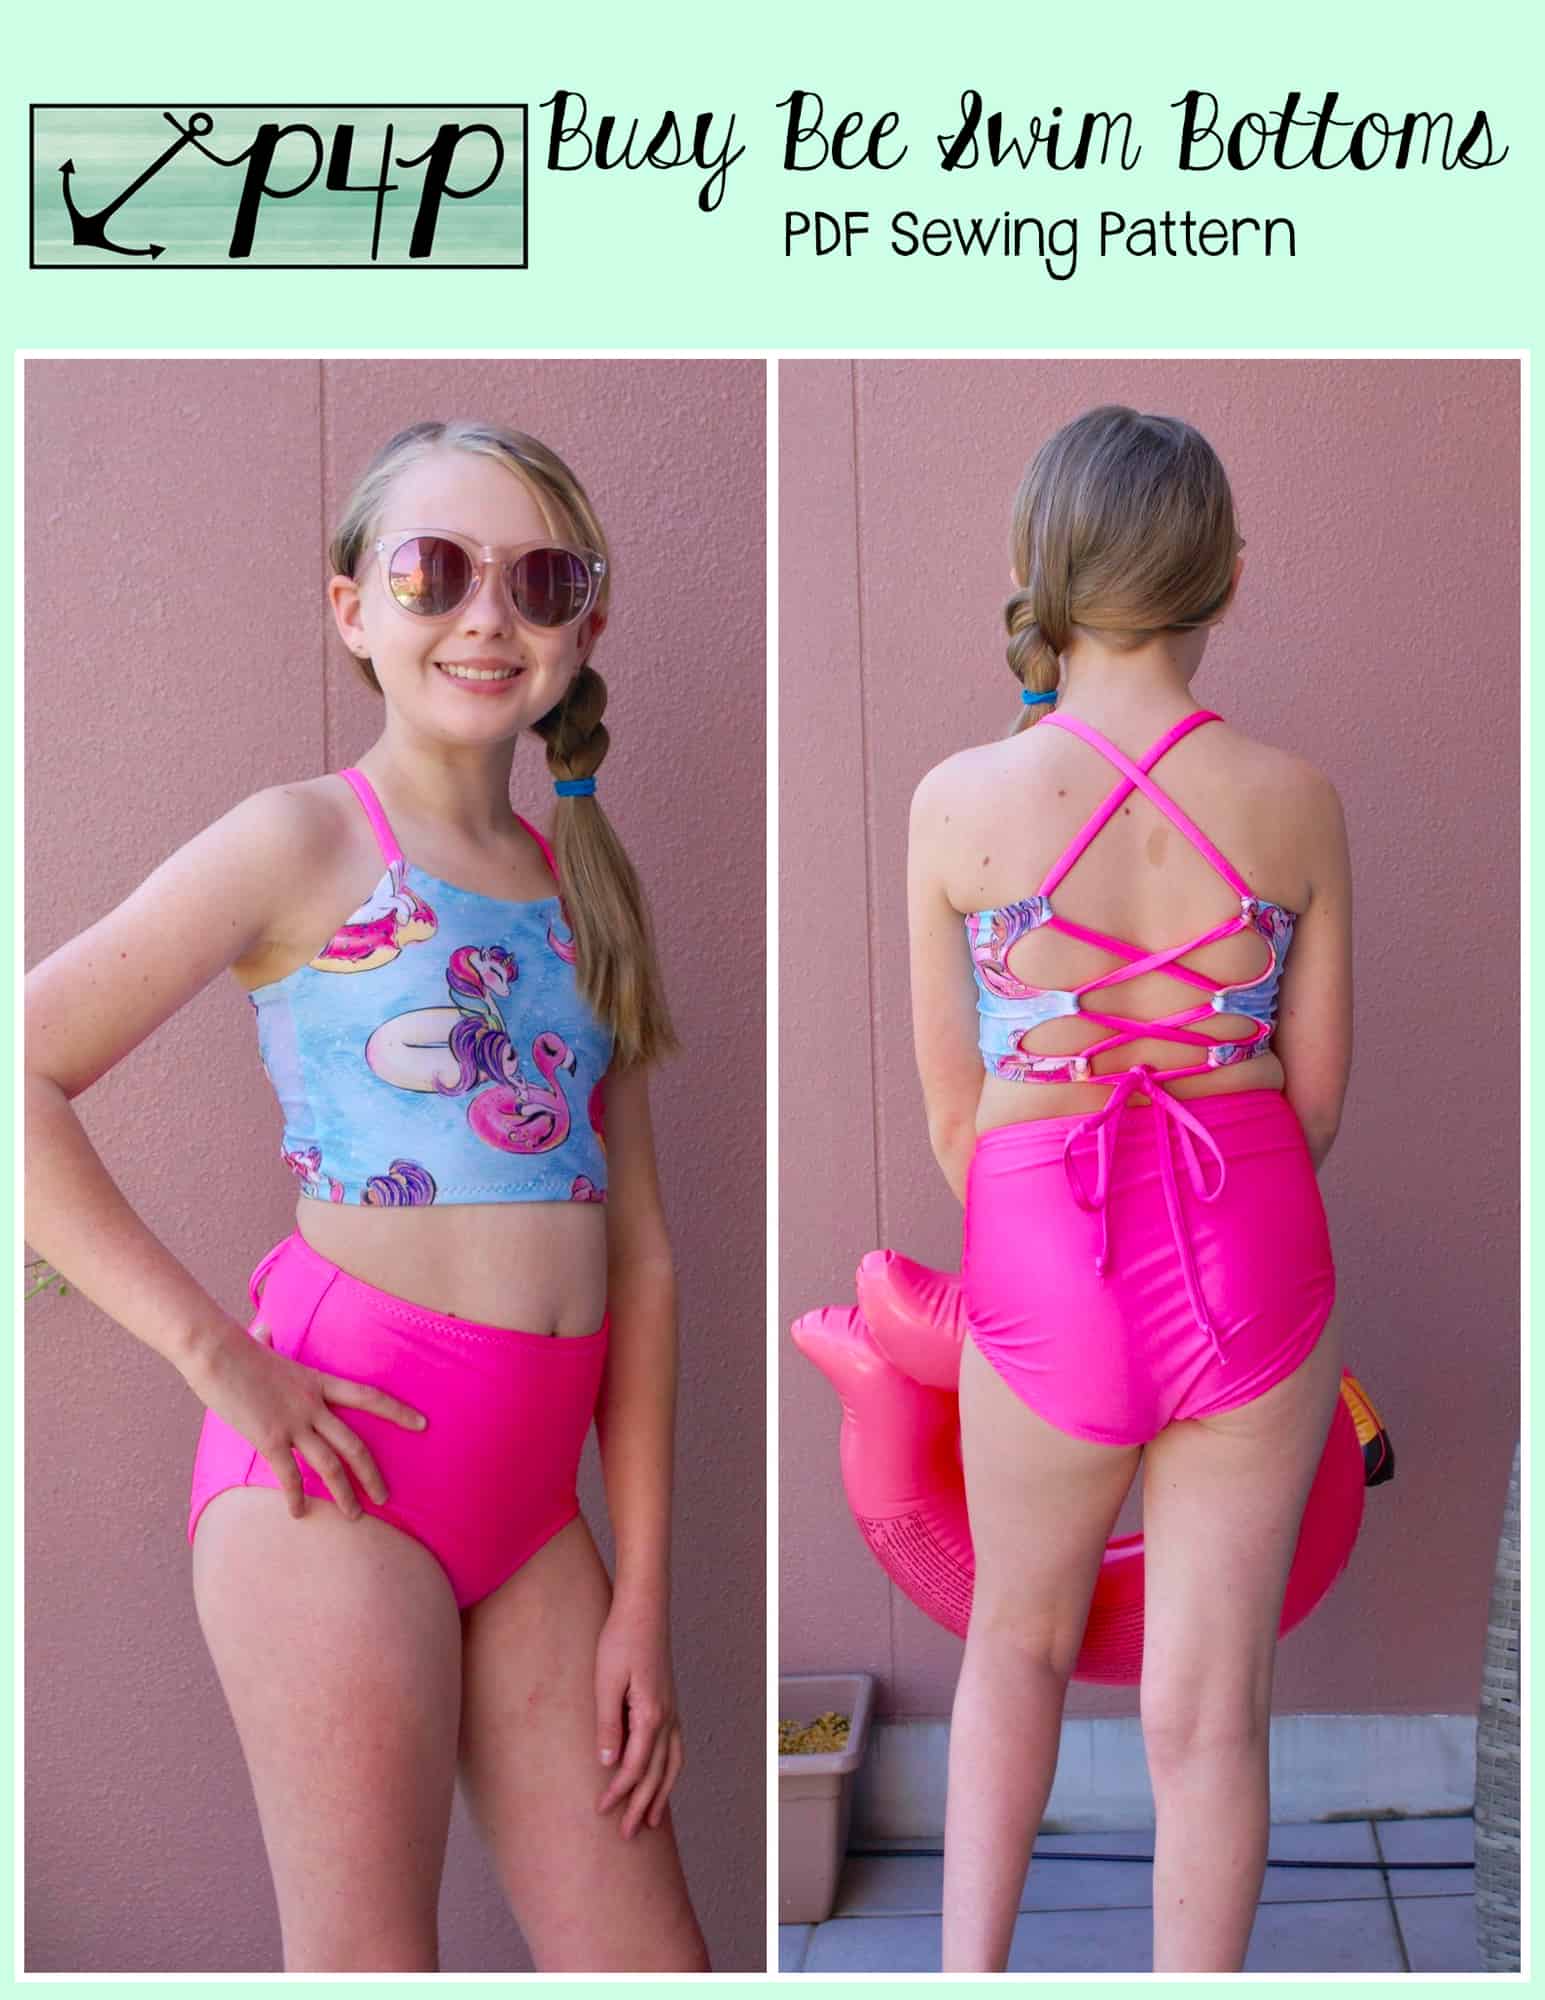 Busy Bee Swim Bottoms- Youth - Patterns for Pirates